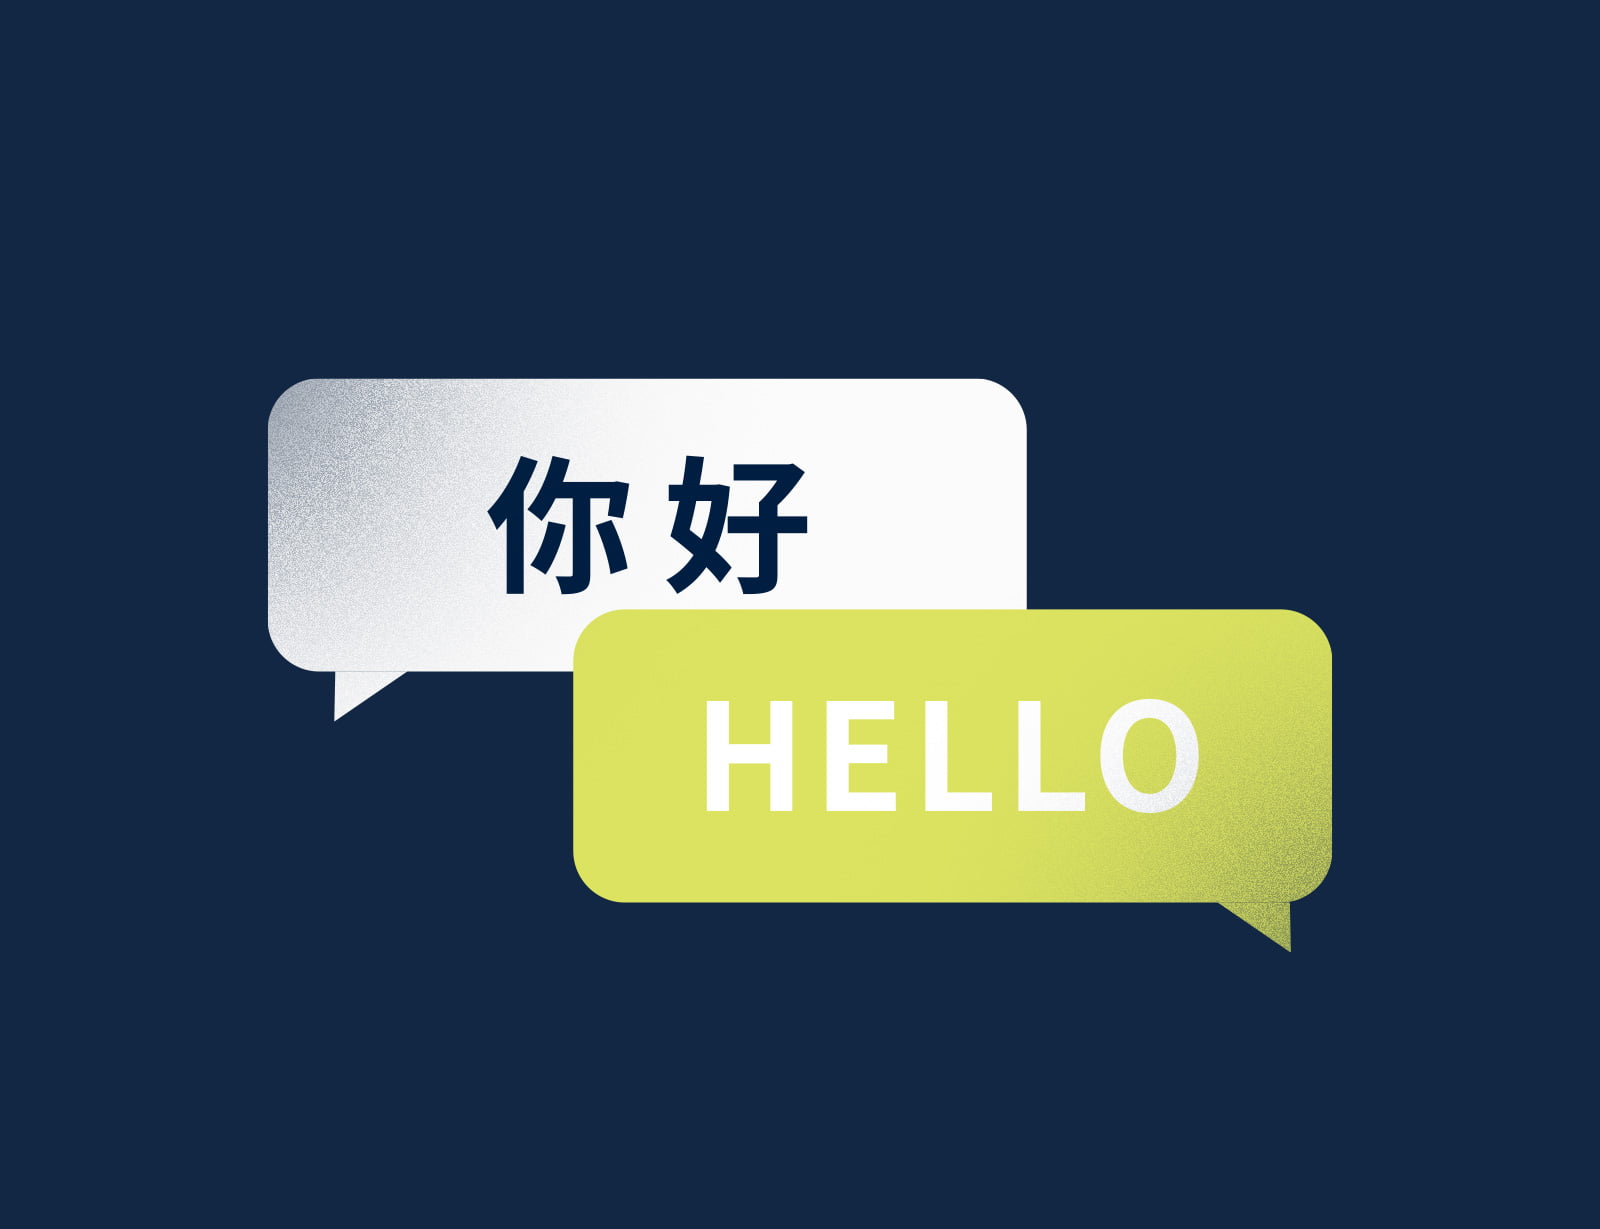 Conteng localization in China - Selecting the correct Chinese terms in China - Flow Asia